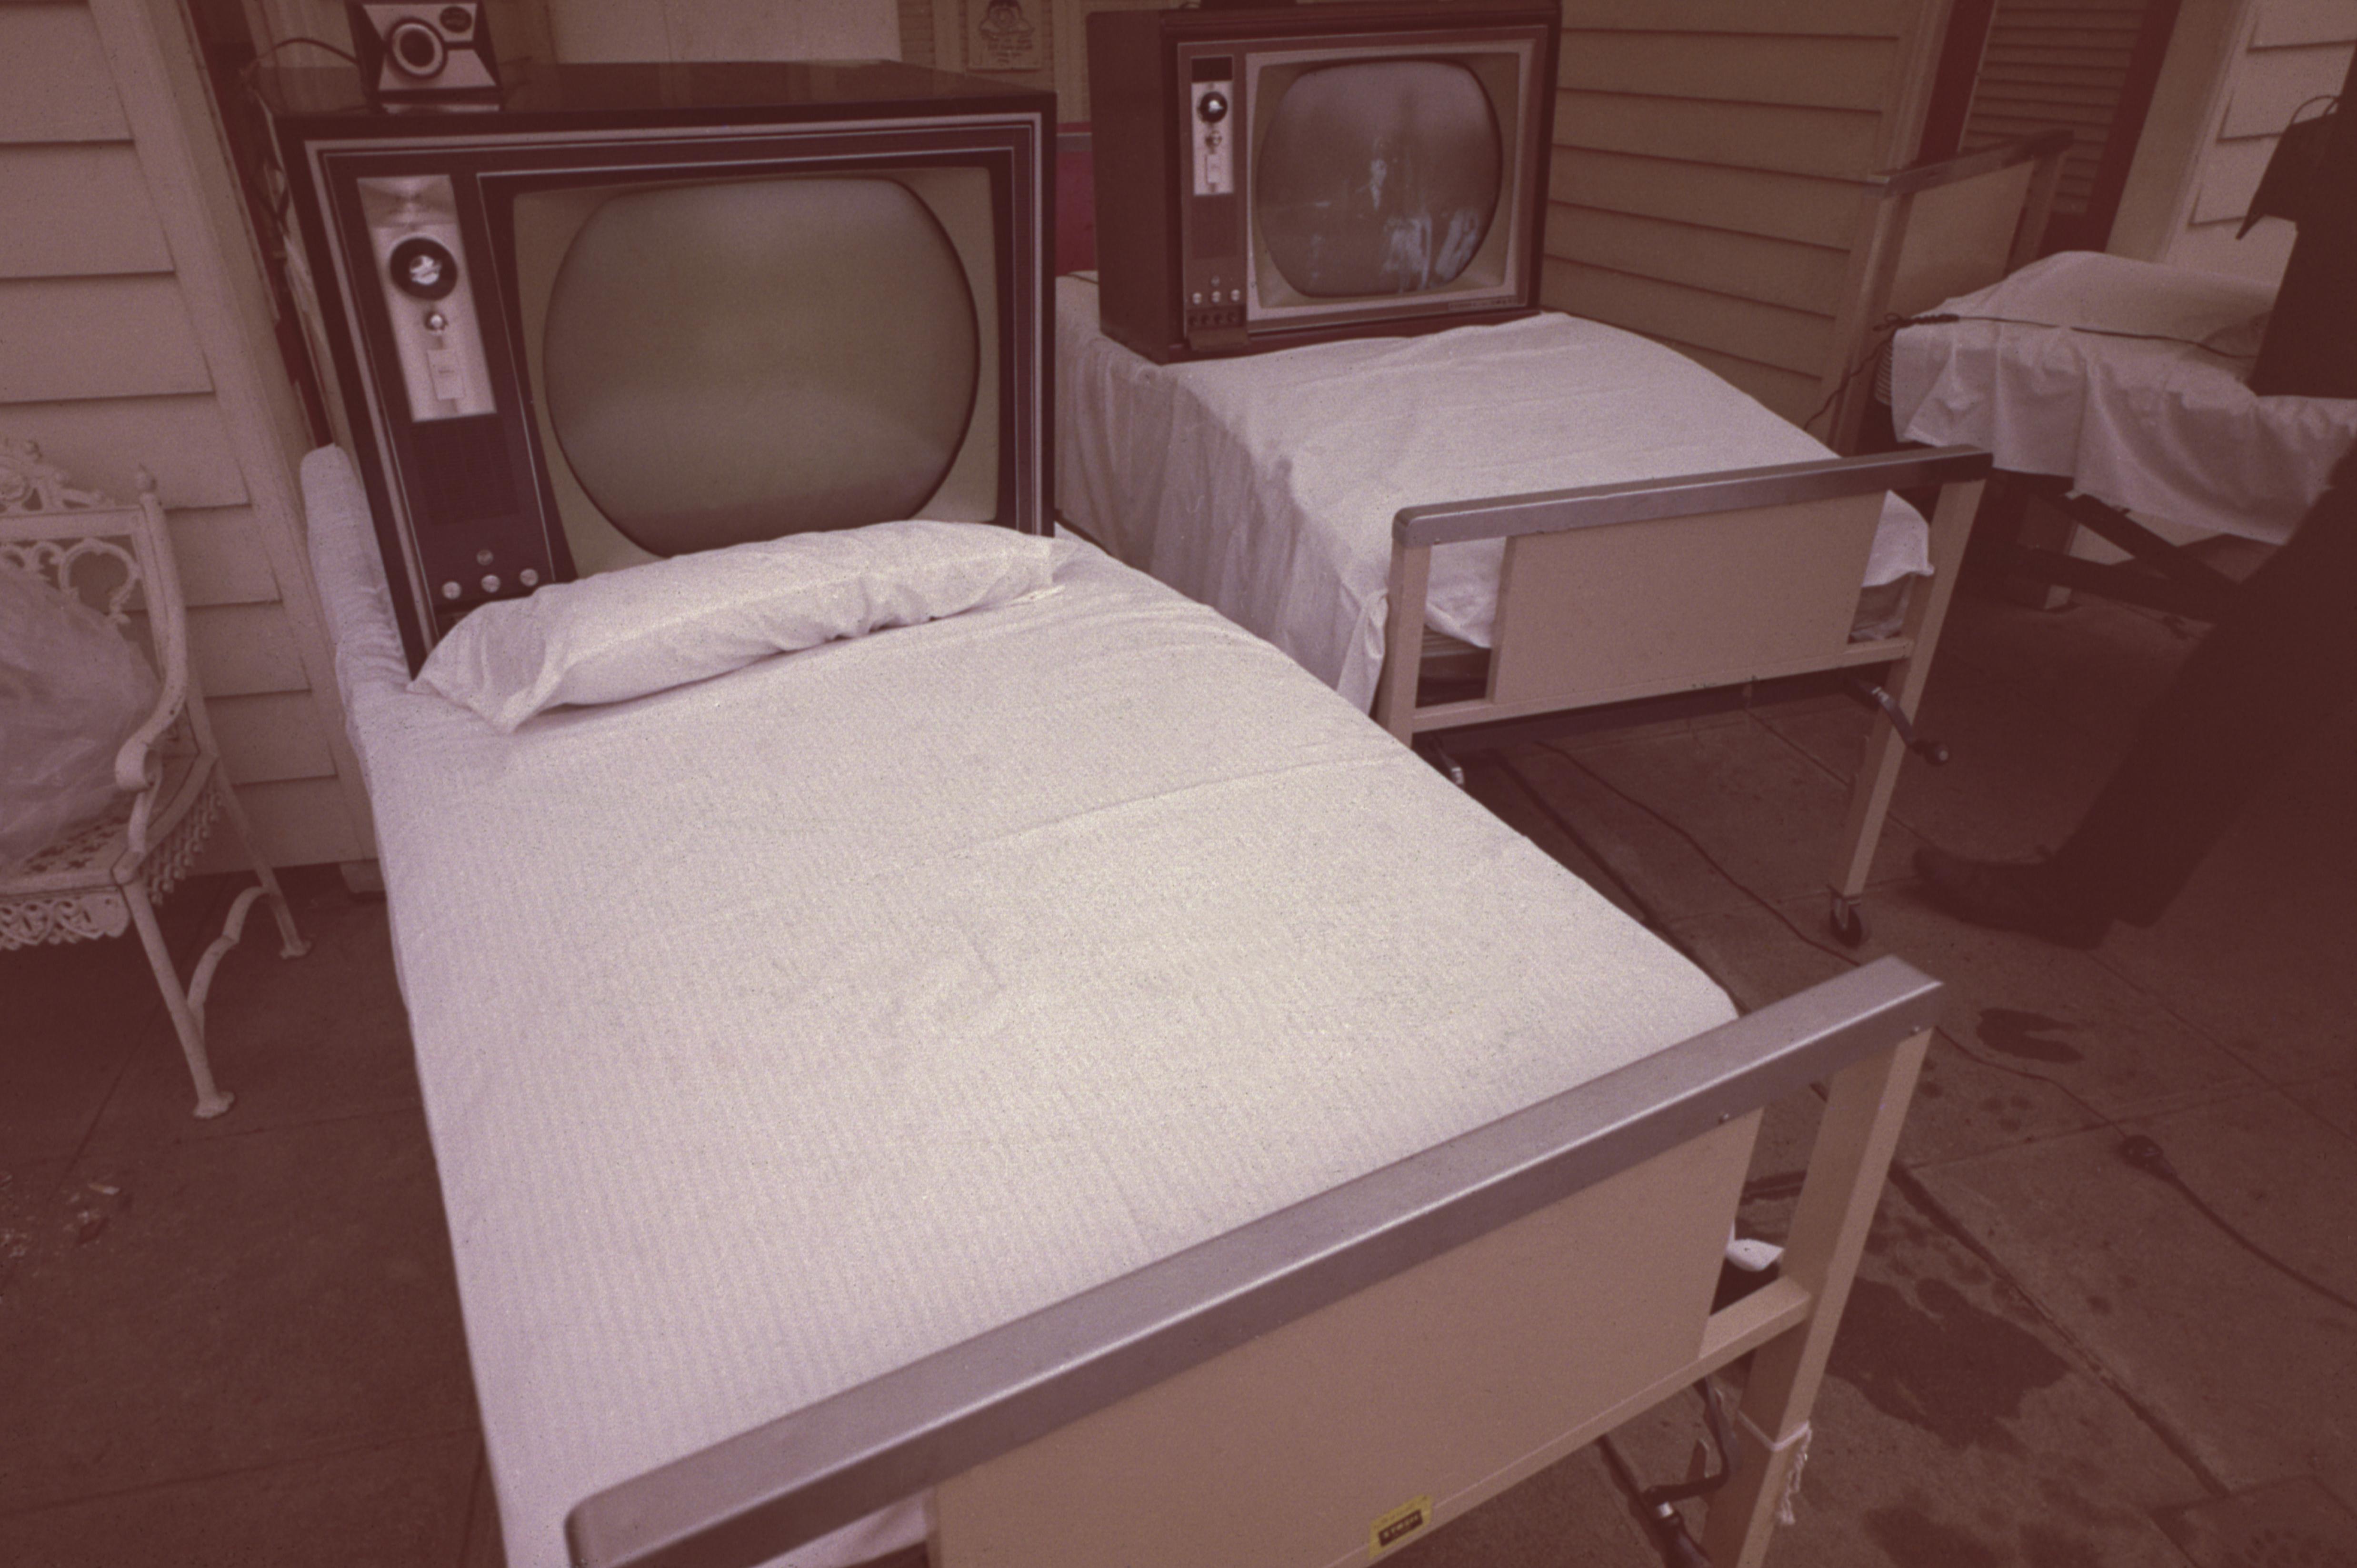 Two old hospital beds made up with white sheets are installed with 50s-style TV sets on the pillow of each bed.